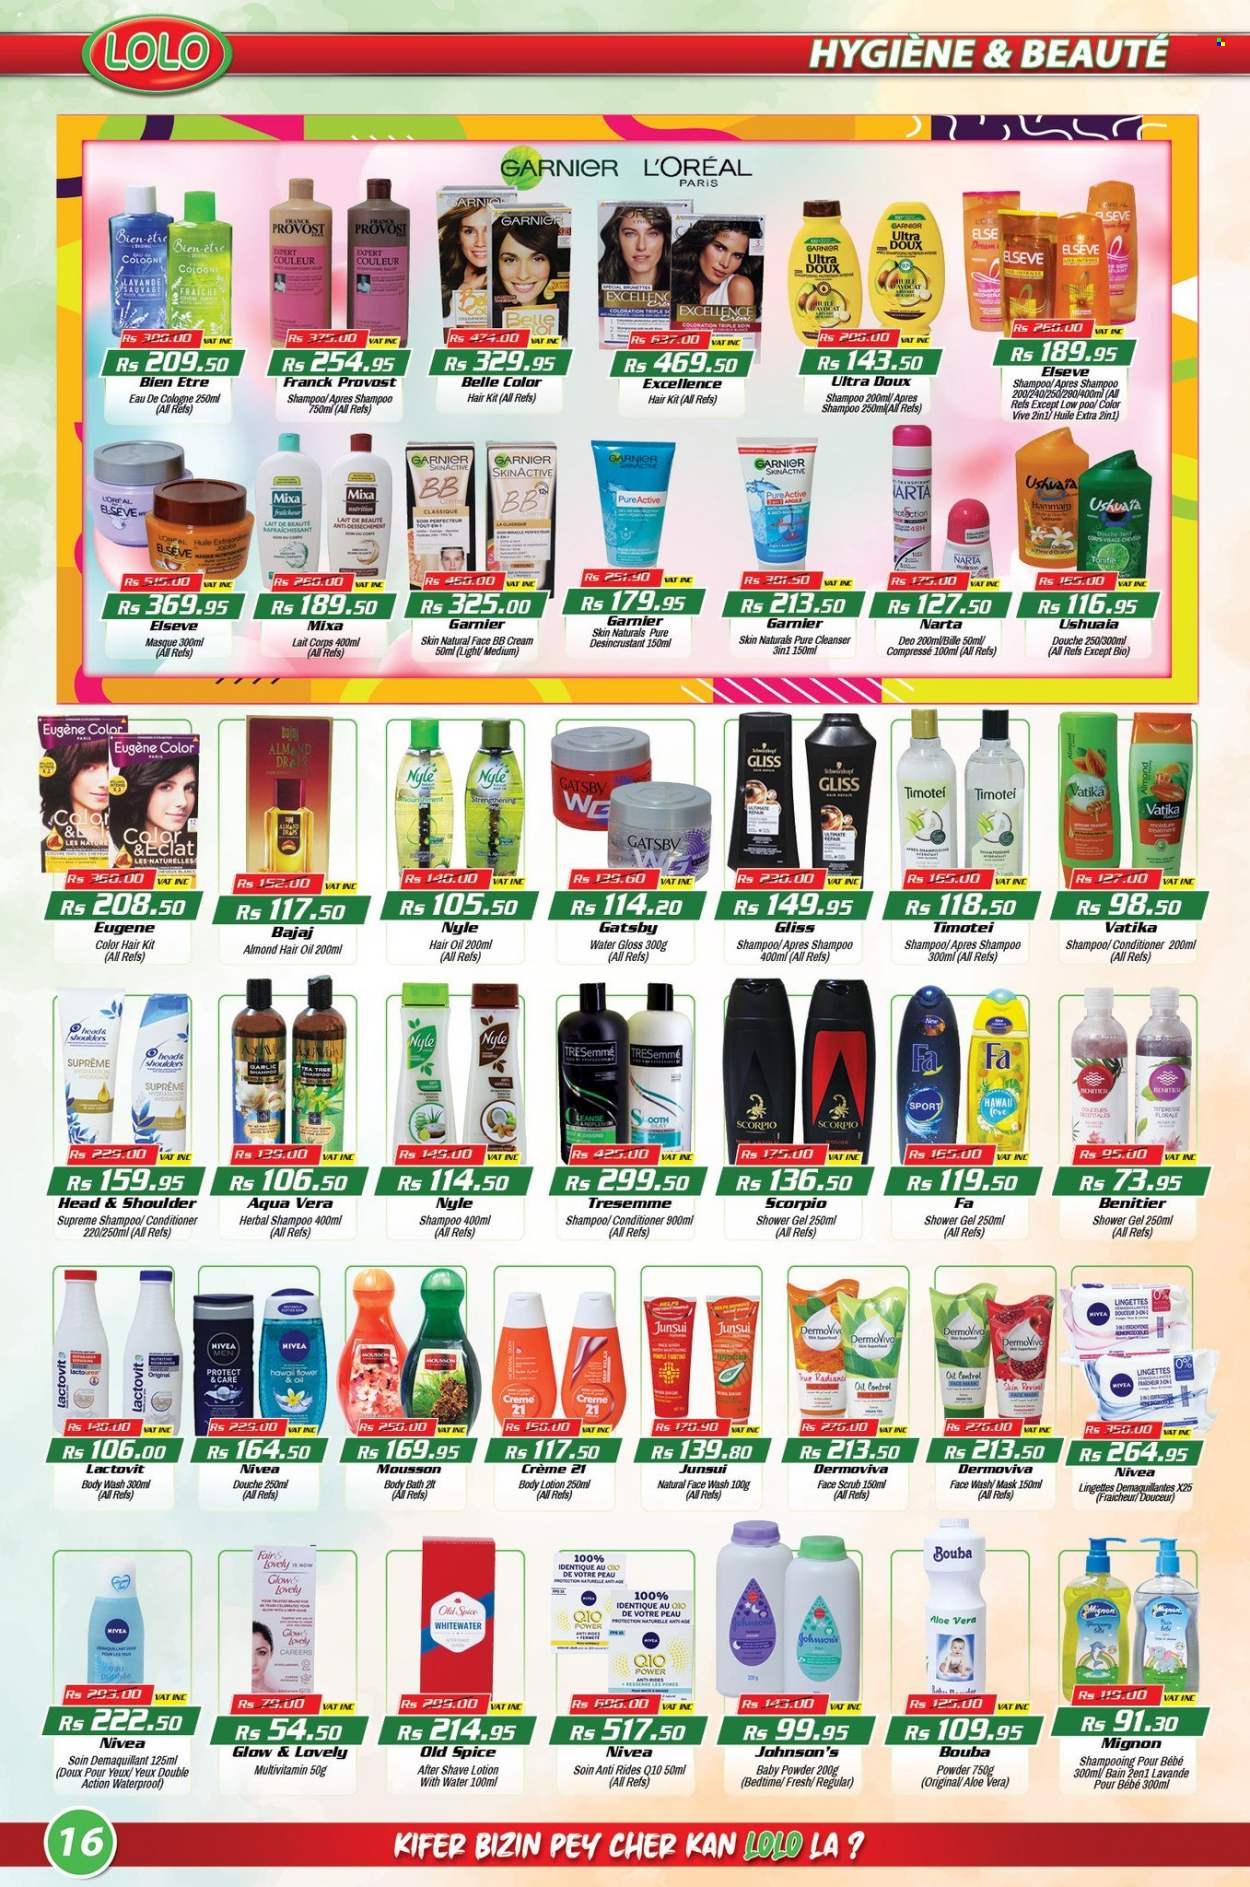 thumbnail - LOLO Hyper Catalogue - 26.03.2023 - 14.04.2023 - Sales products - spice, oil, Johnson's, Nivea, baby powder, body wash, shower gel, Gliss, face gel, Mousson, cleanser, L’Oréal, face mask, face wash, conditioner, TRESemmé, Head & Shoulders, hair oil, body lotion, after shave, Eclat, cologne, multivitamin, Franck Provost, Garnier, shampoo, Old Spice, deodorant. Page 16.